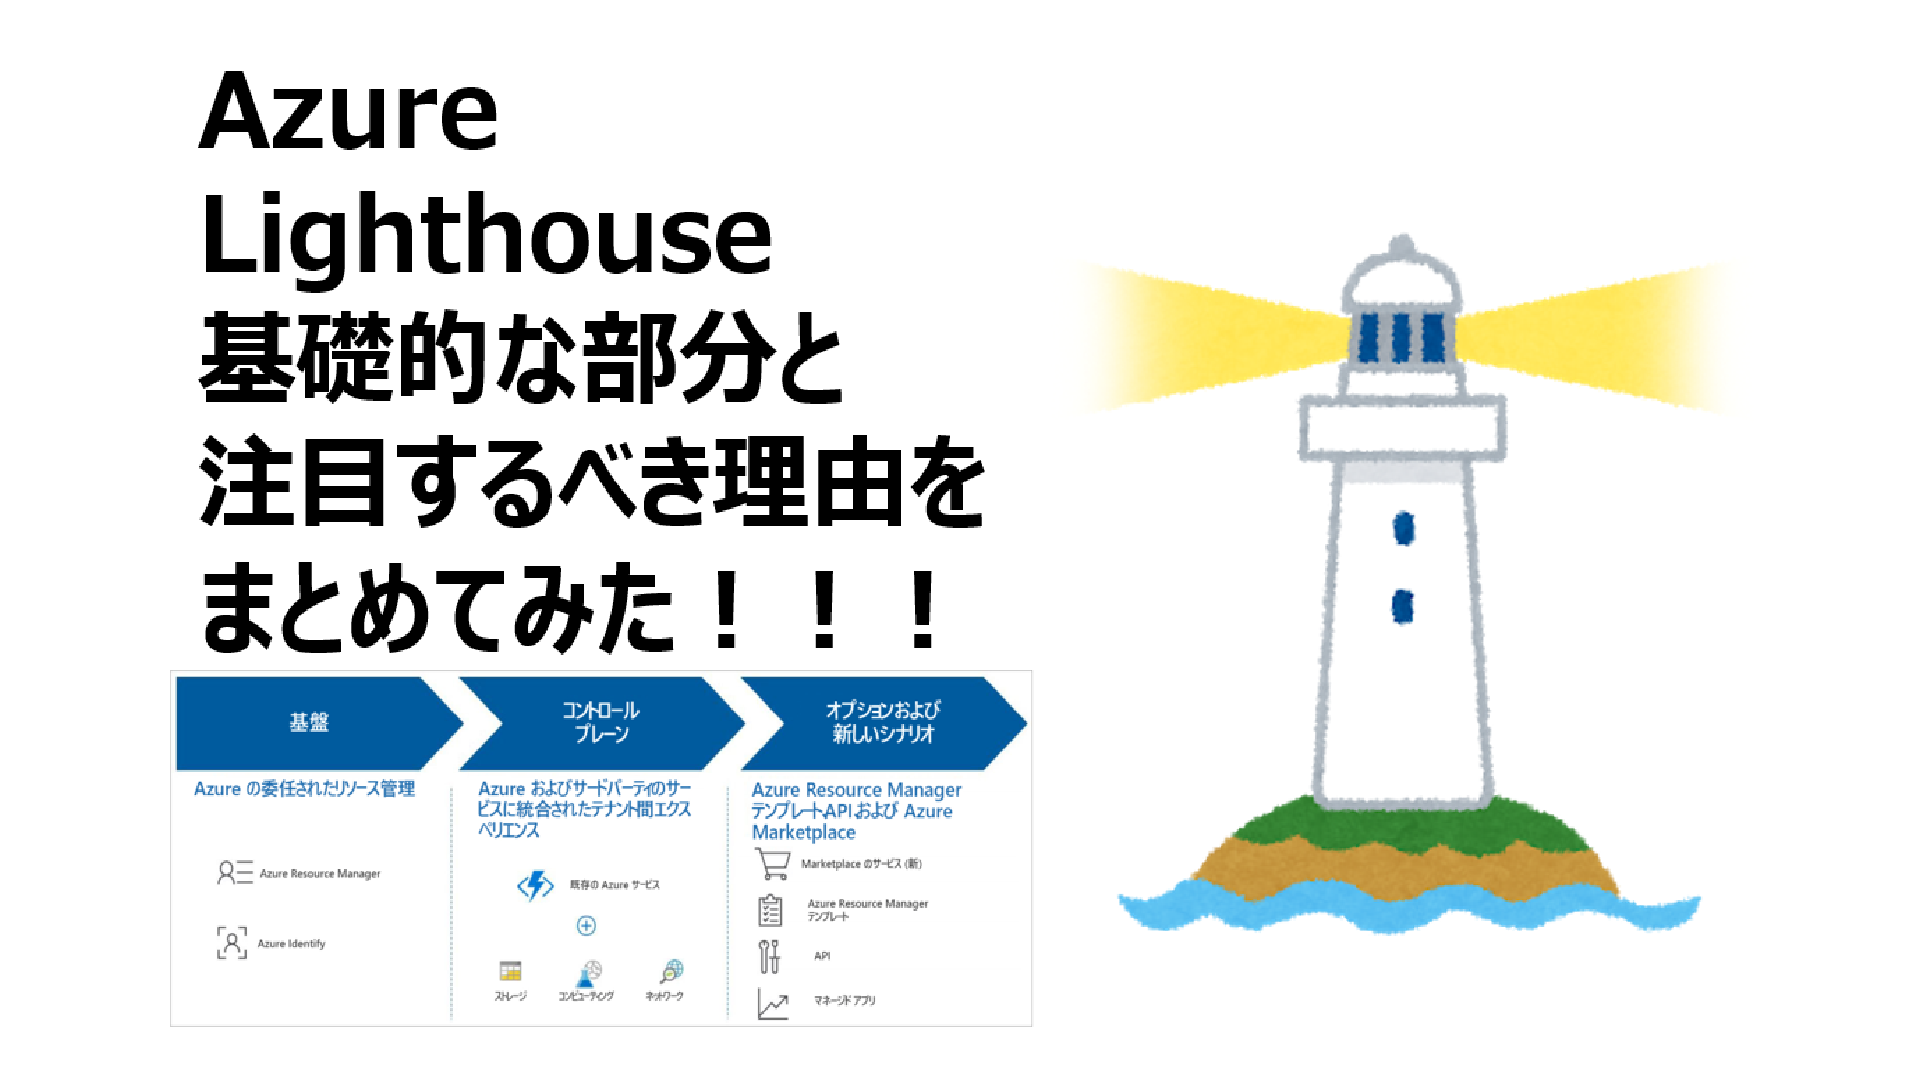 azblob://2022/11/11/eyecatch/2020-02-14-what-is-azure-lighthouse-000.png